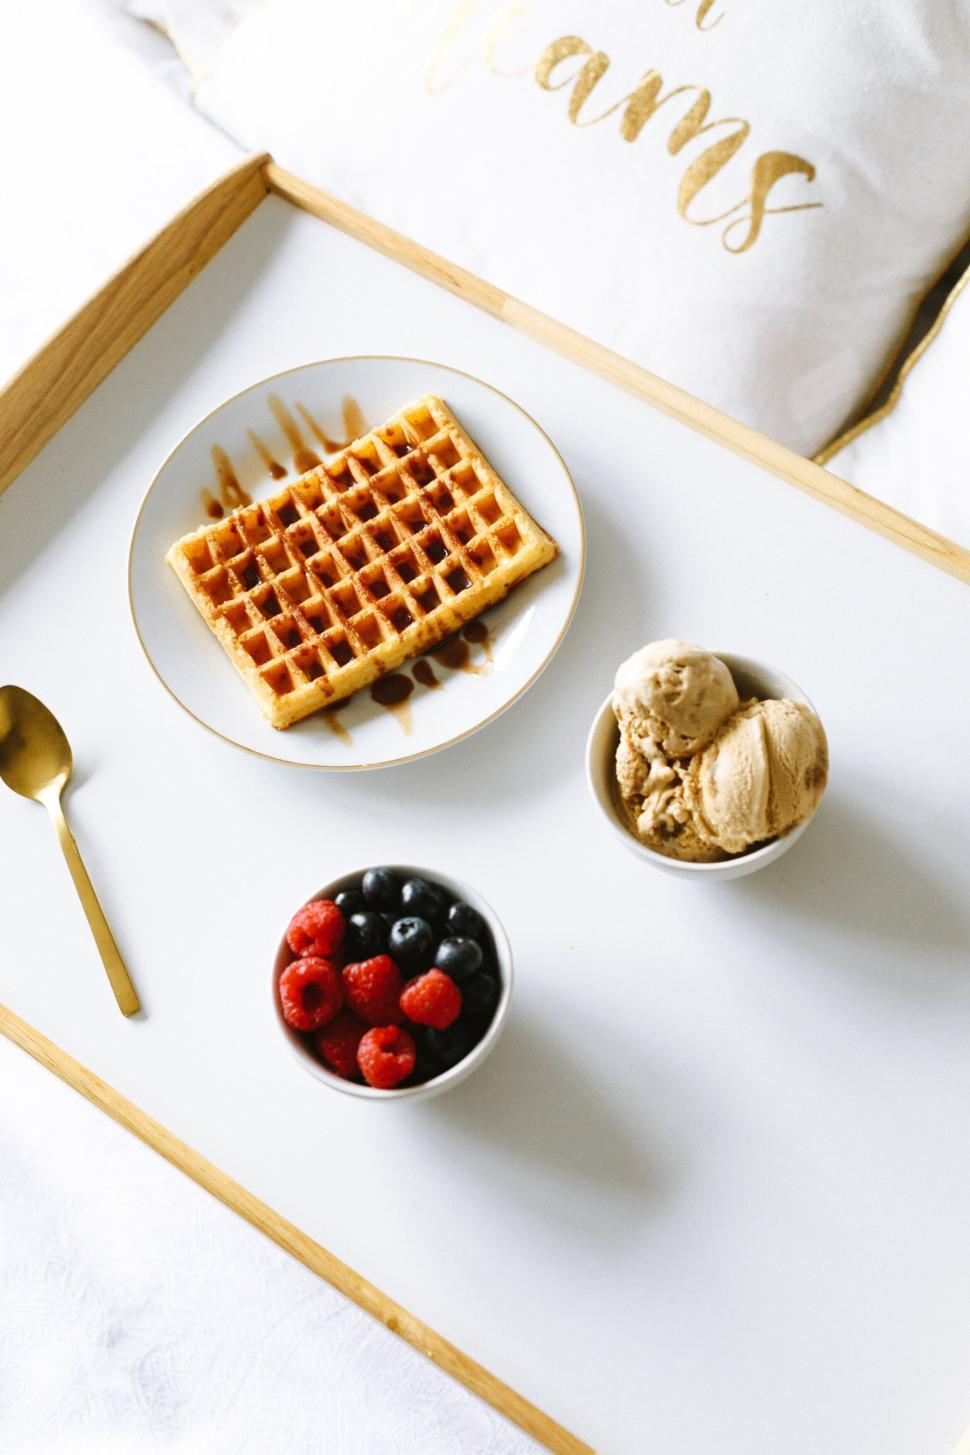 Free Image of Breakfast tray with waffle and ice cream 